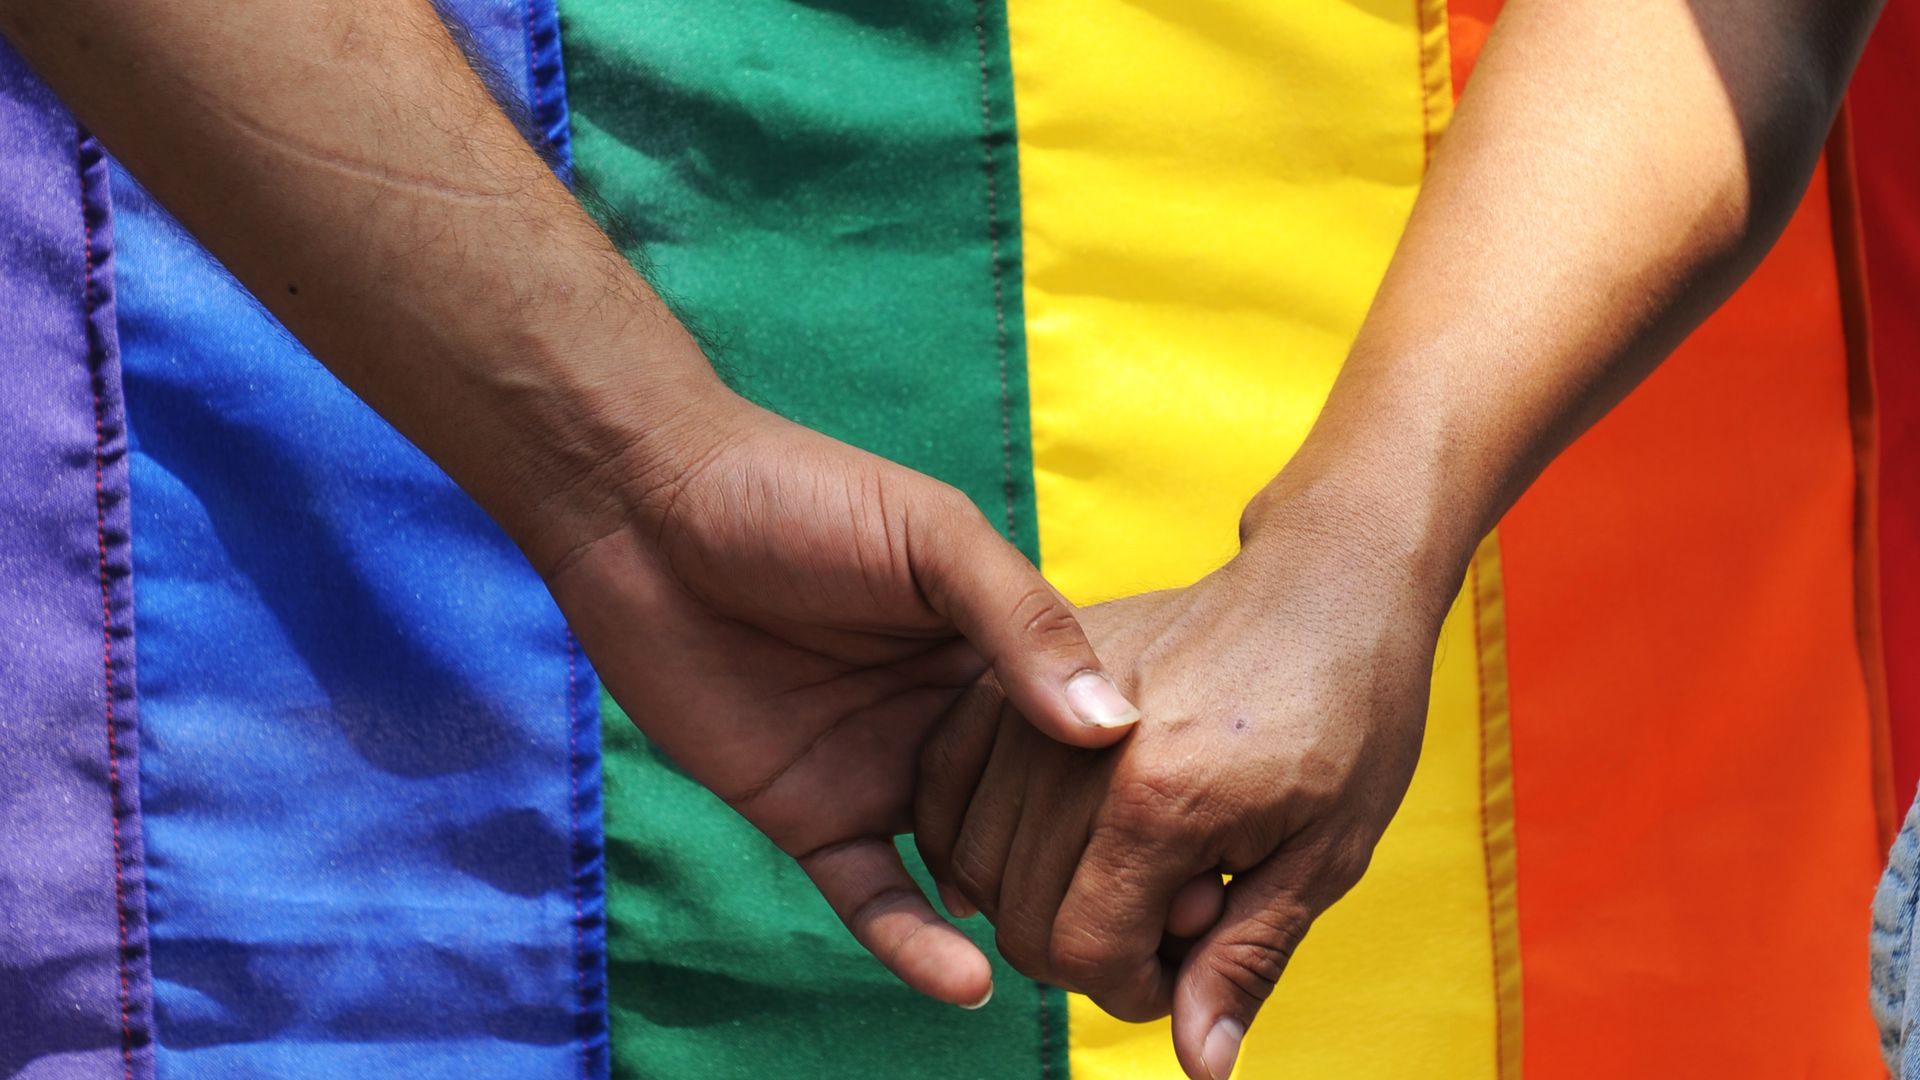 Two hands are held together in front of a pride flag